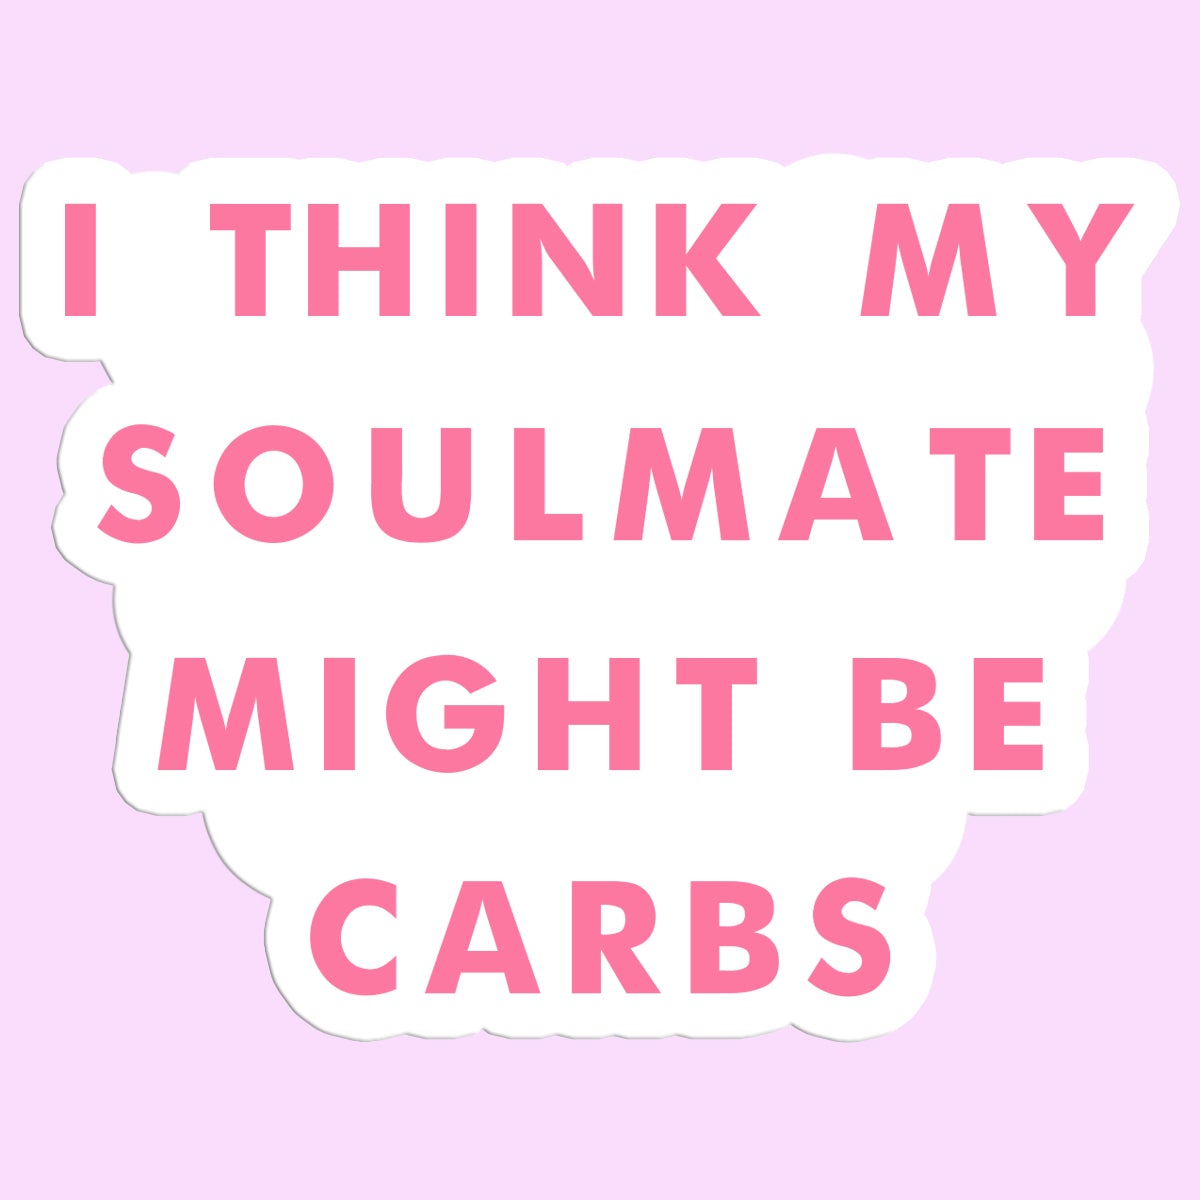 I Think My Soulmate Might Be Carbs Sticker Decal